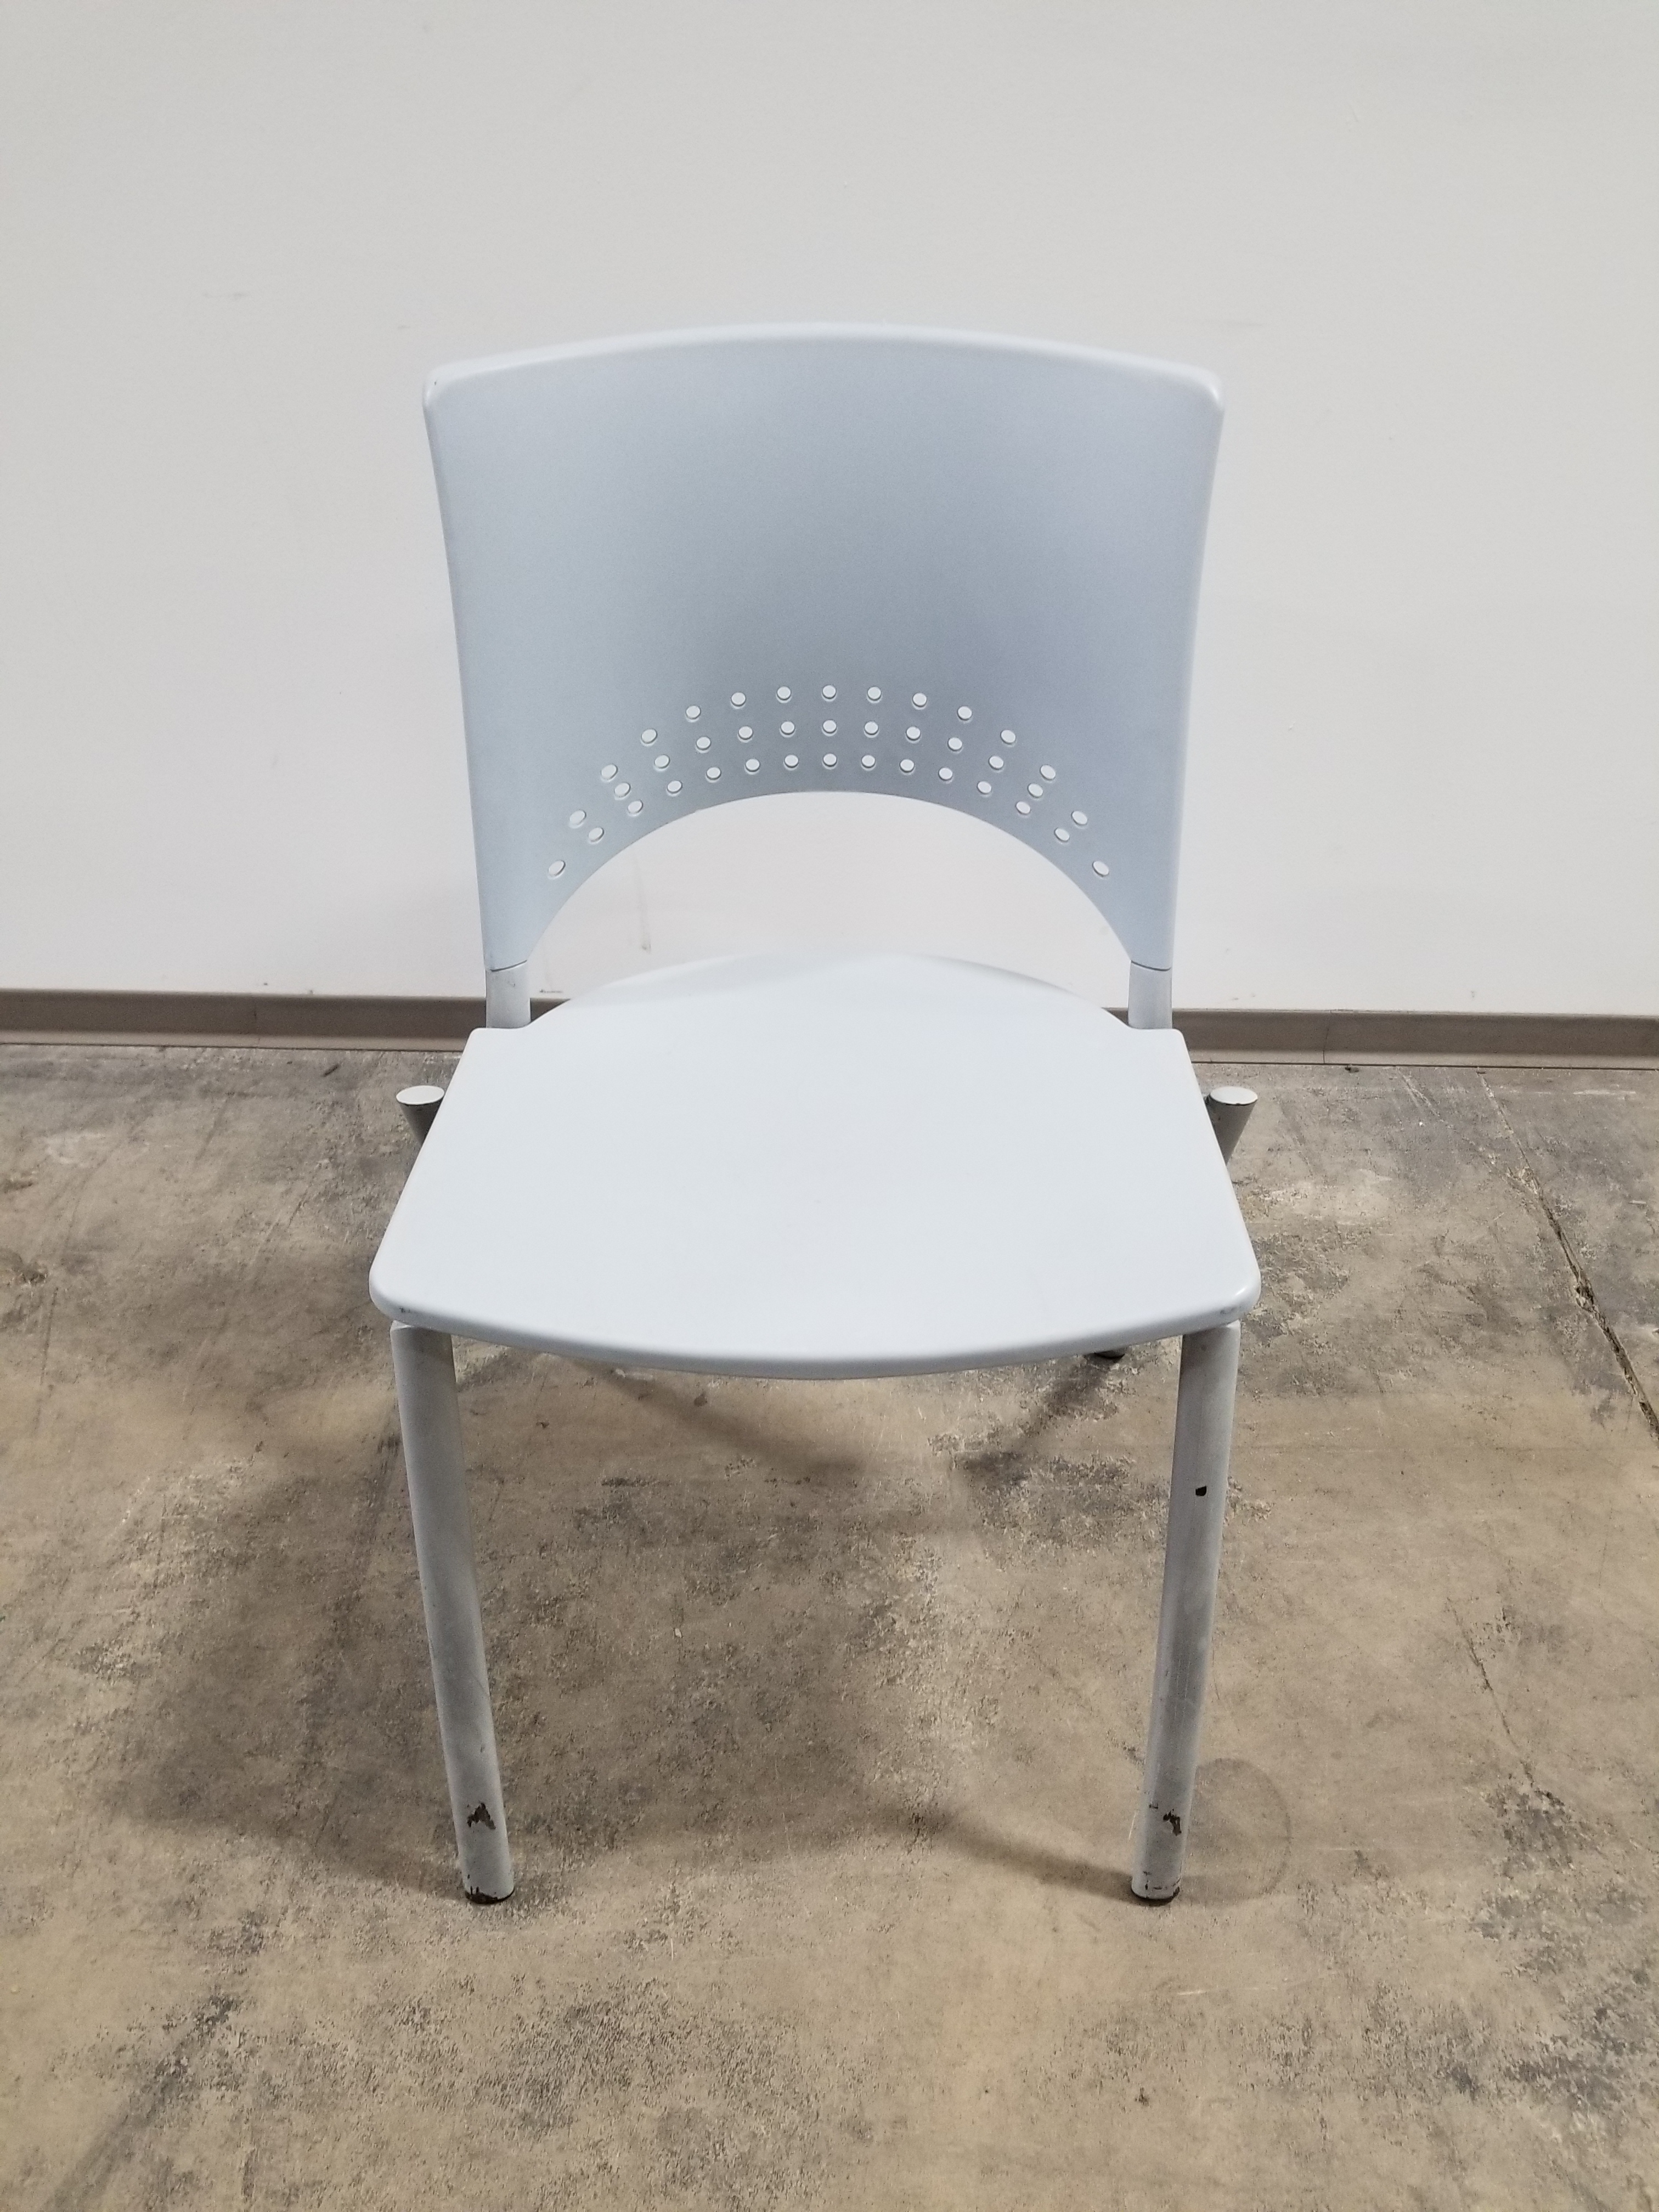 Stacking Durable Plastic Chairs Office Furniture Chicago